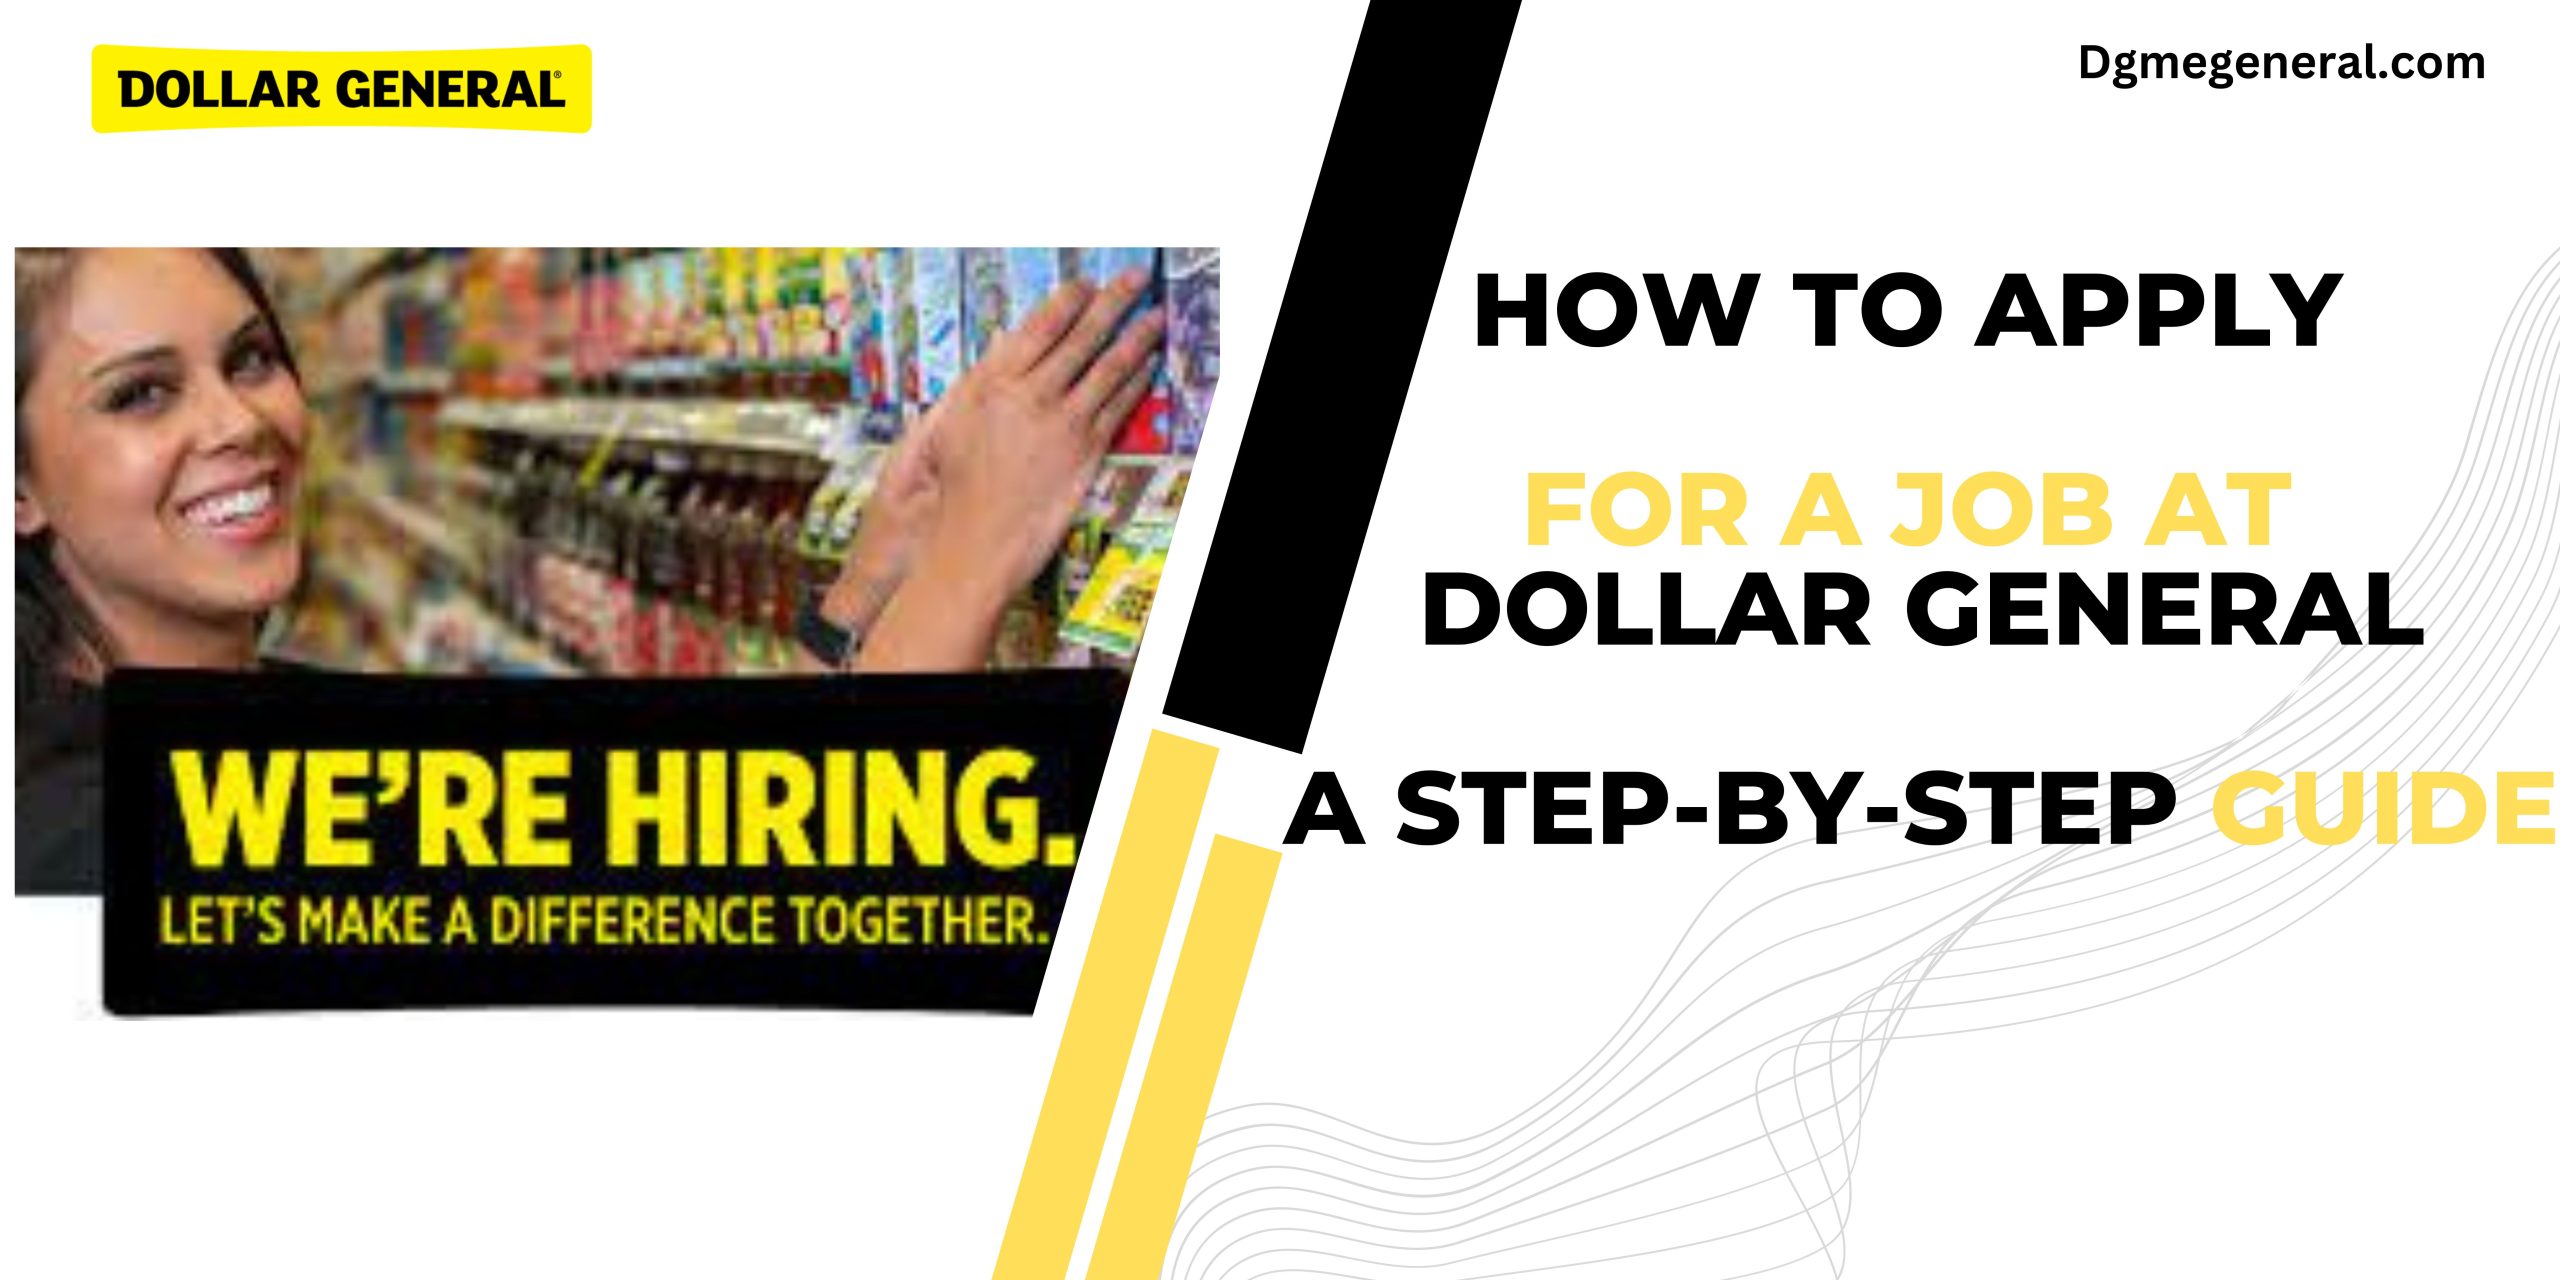 How to Apply for a Job at Dollar General A Step-by-Step Guide